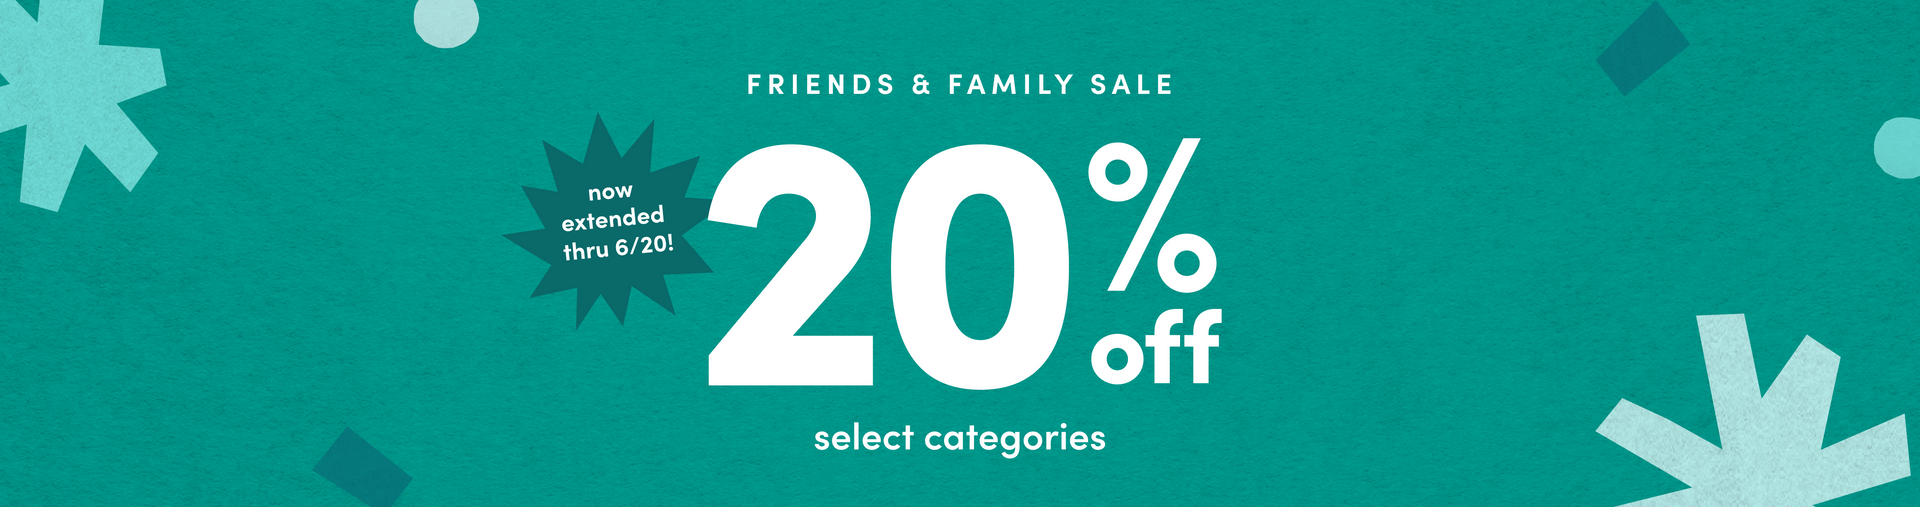 FRIENDS & FAMILY SALE 20% off select categories ends 6/16!